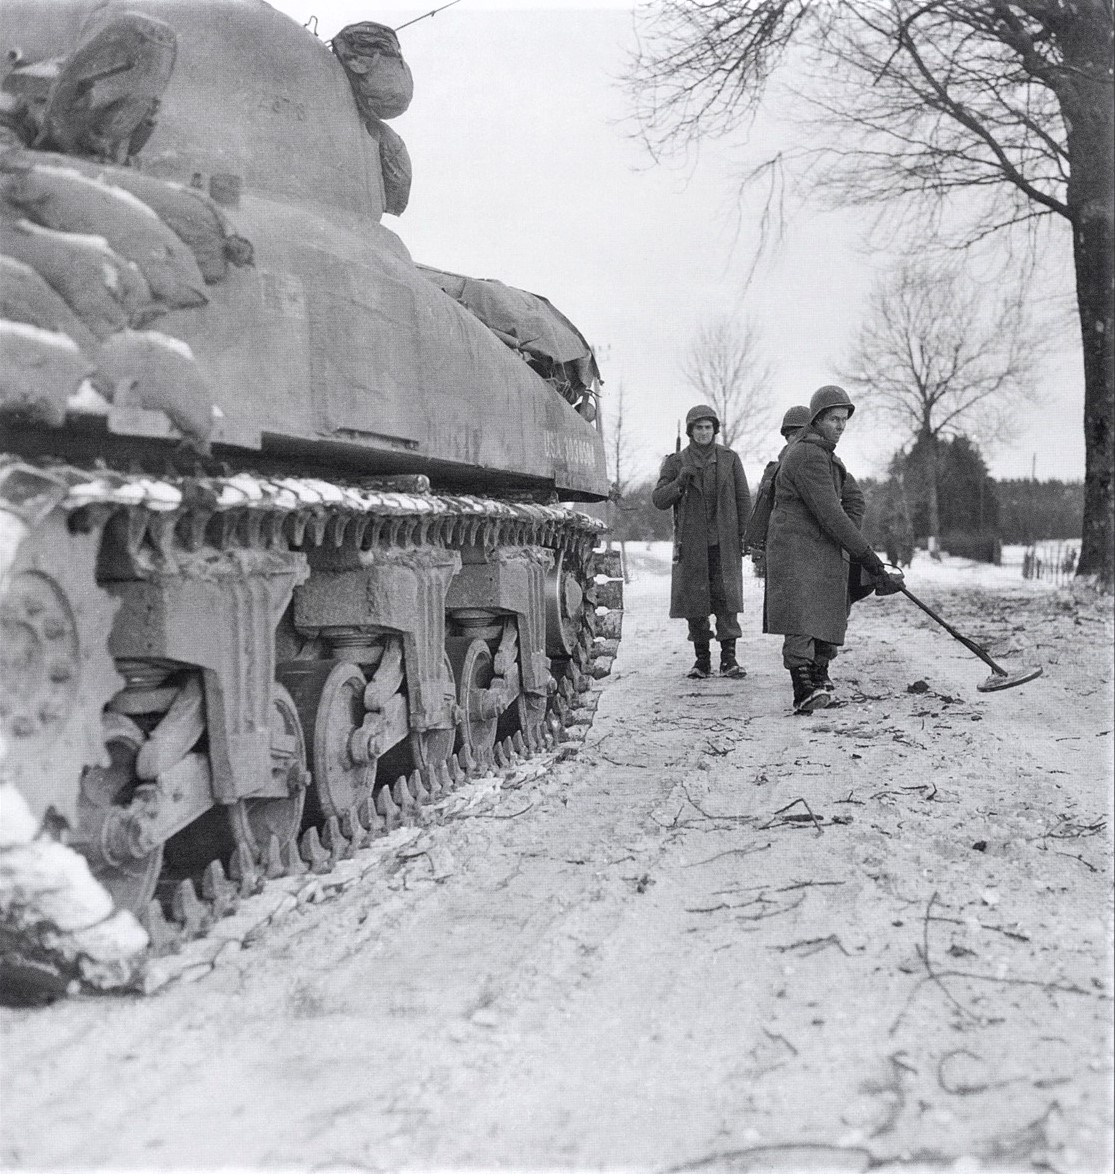 January 16, 1945, Road to Houffalize, Belgium. Engineers of the 17th Armored Engineer Battalion sweep for mines, it is cleary a staged situation. Photo from the 165th signal company, by the name of Ellet. (Source: Neelys Forgotten Archives - 1)